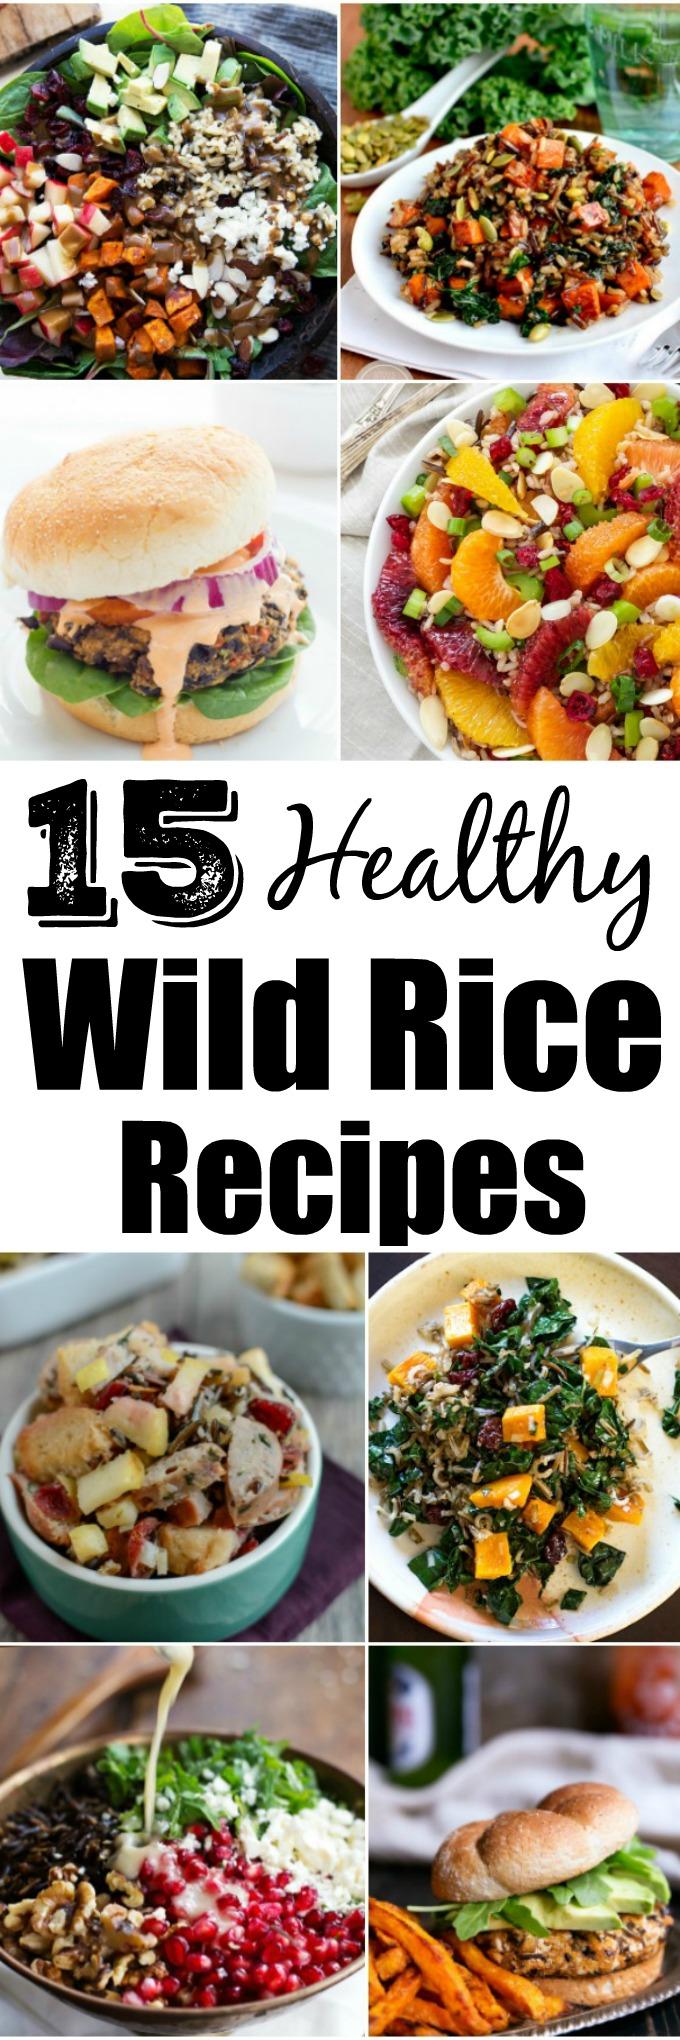 Looking for Healthy Wild Rice Recipes? Here are 15 protein-packed ways to use wild rice in dinner and side dish recipes!